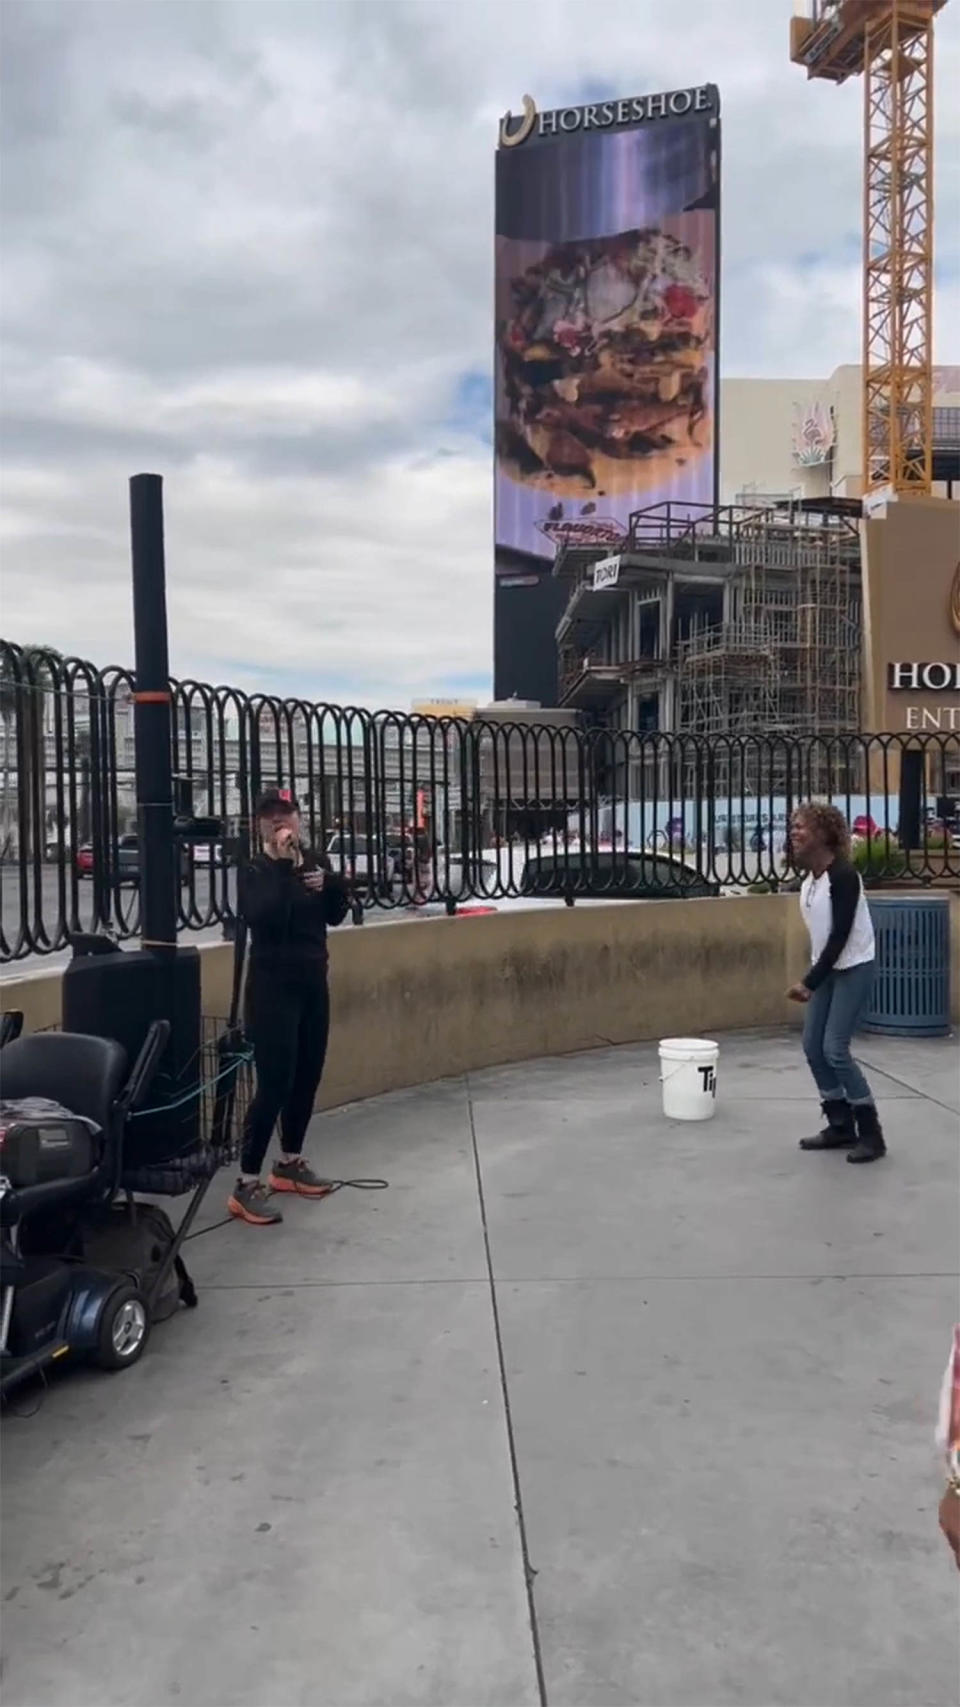 Kelly Clarkson gives an impromptu performance on the streets of Las Vegas, joining a street performer jamming out to Tina Turner! (Instagram)